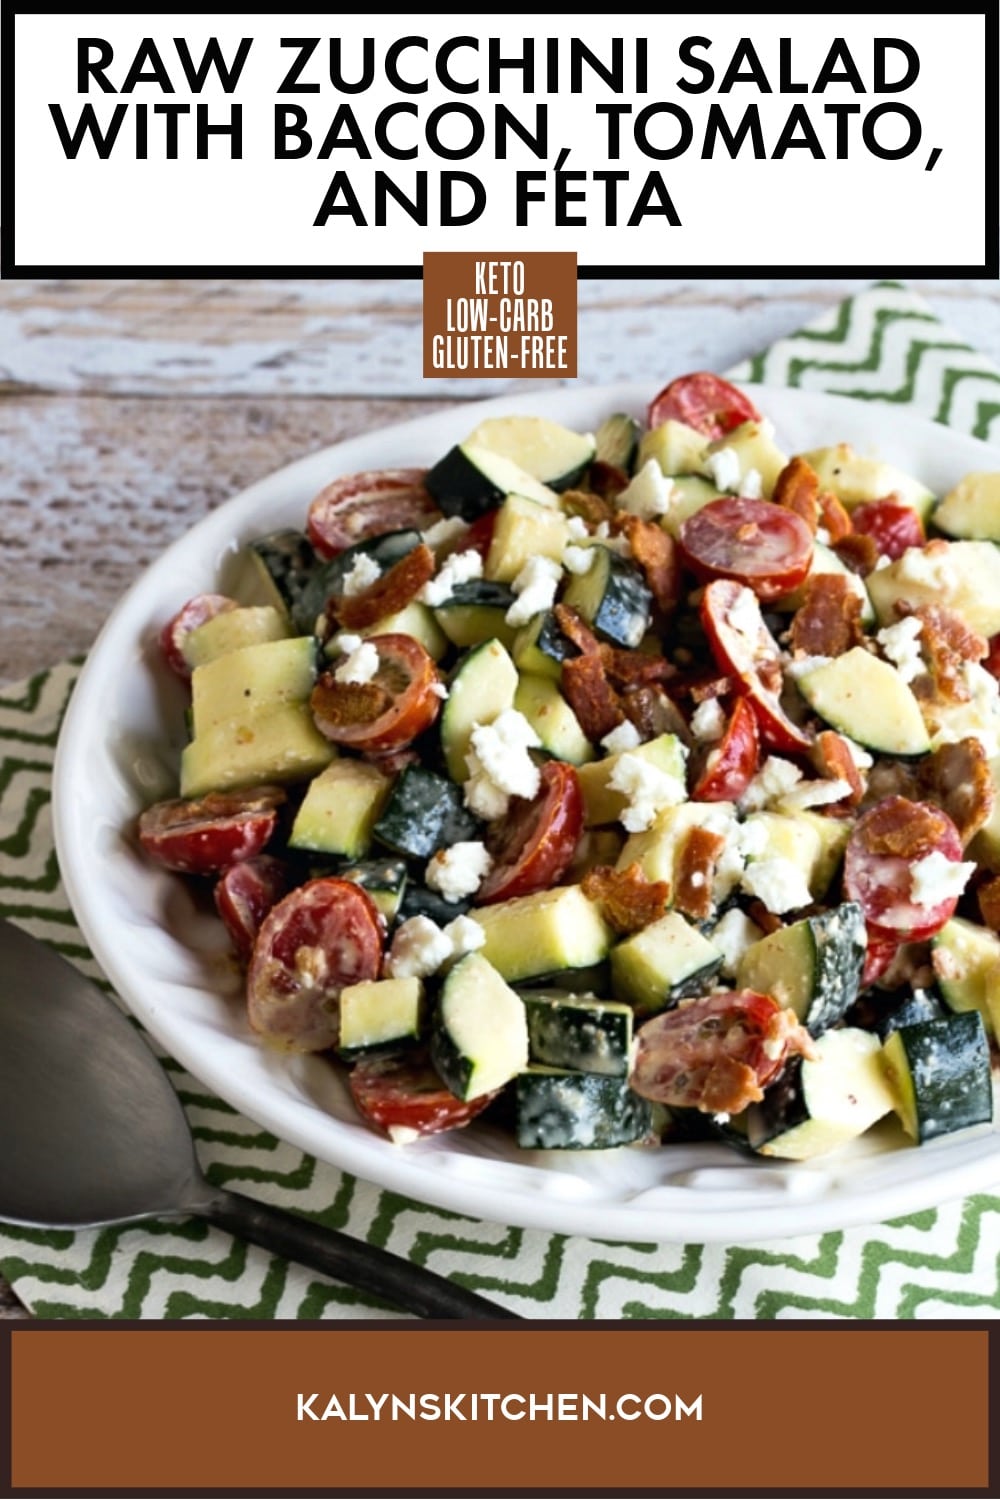 Pinterest image of Raw Zucchini Salad with Bacon, Tomato, and Feta